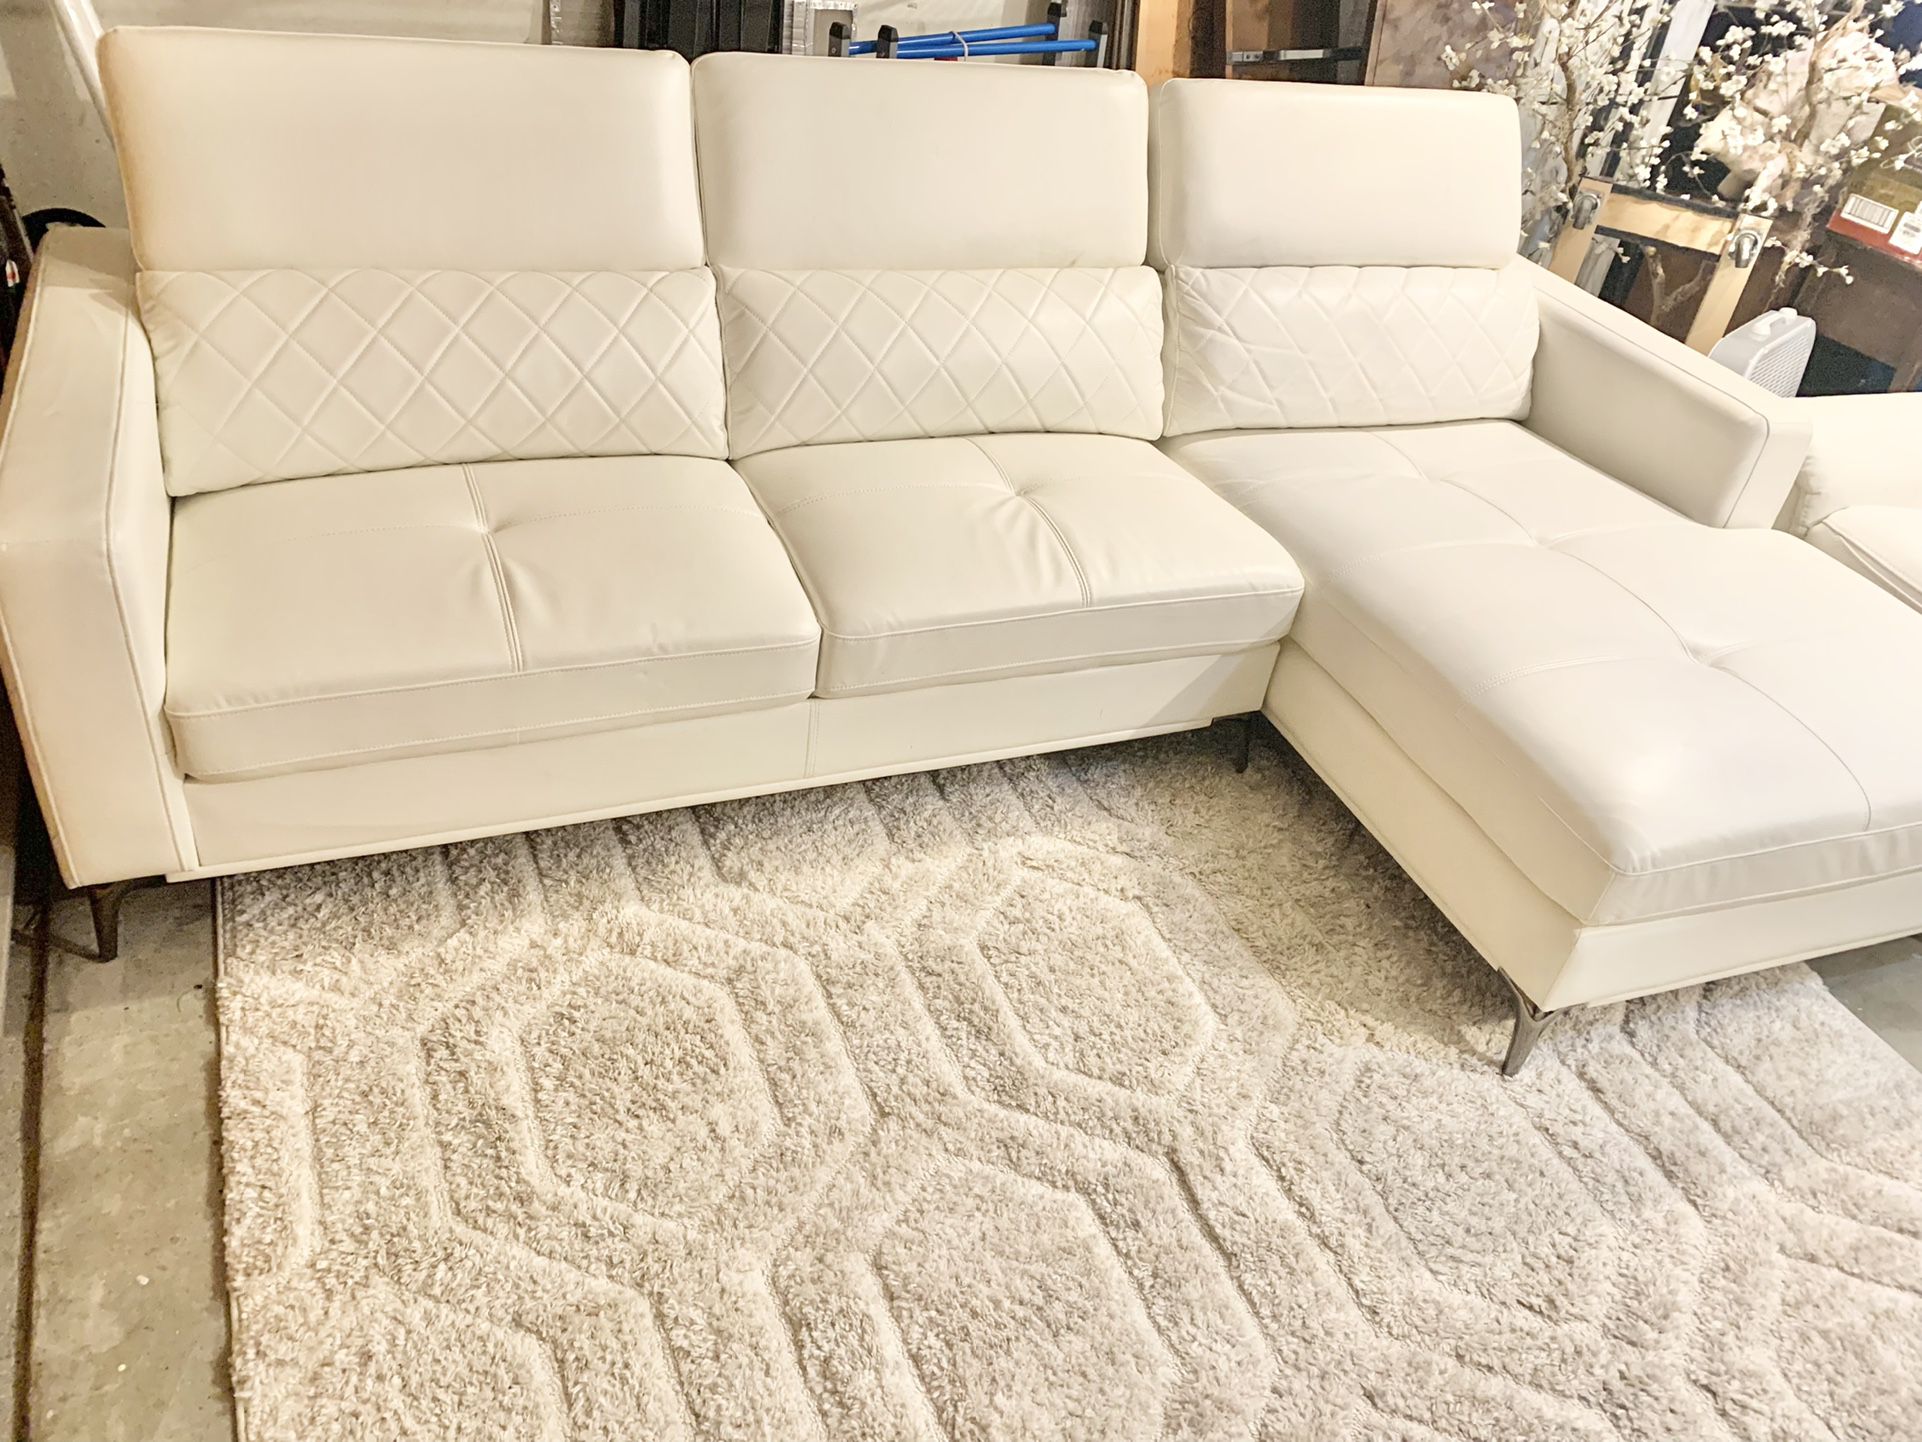 Like New Sofia Vergara Leather Sectional Couch 